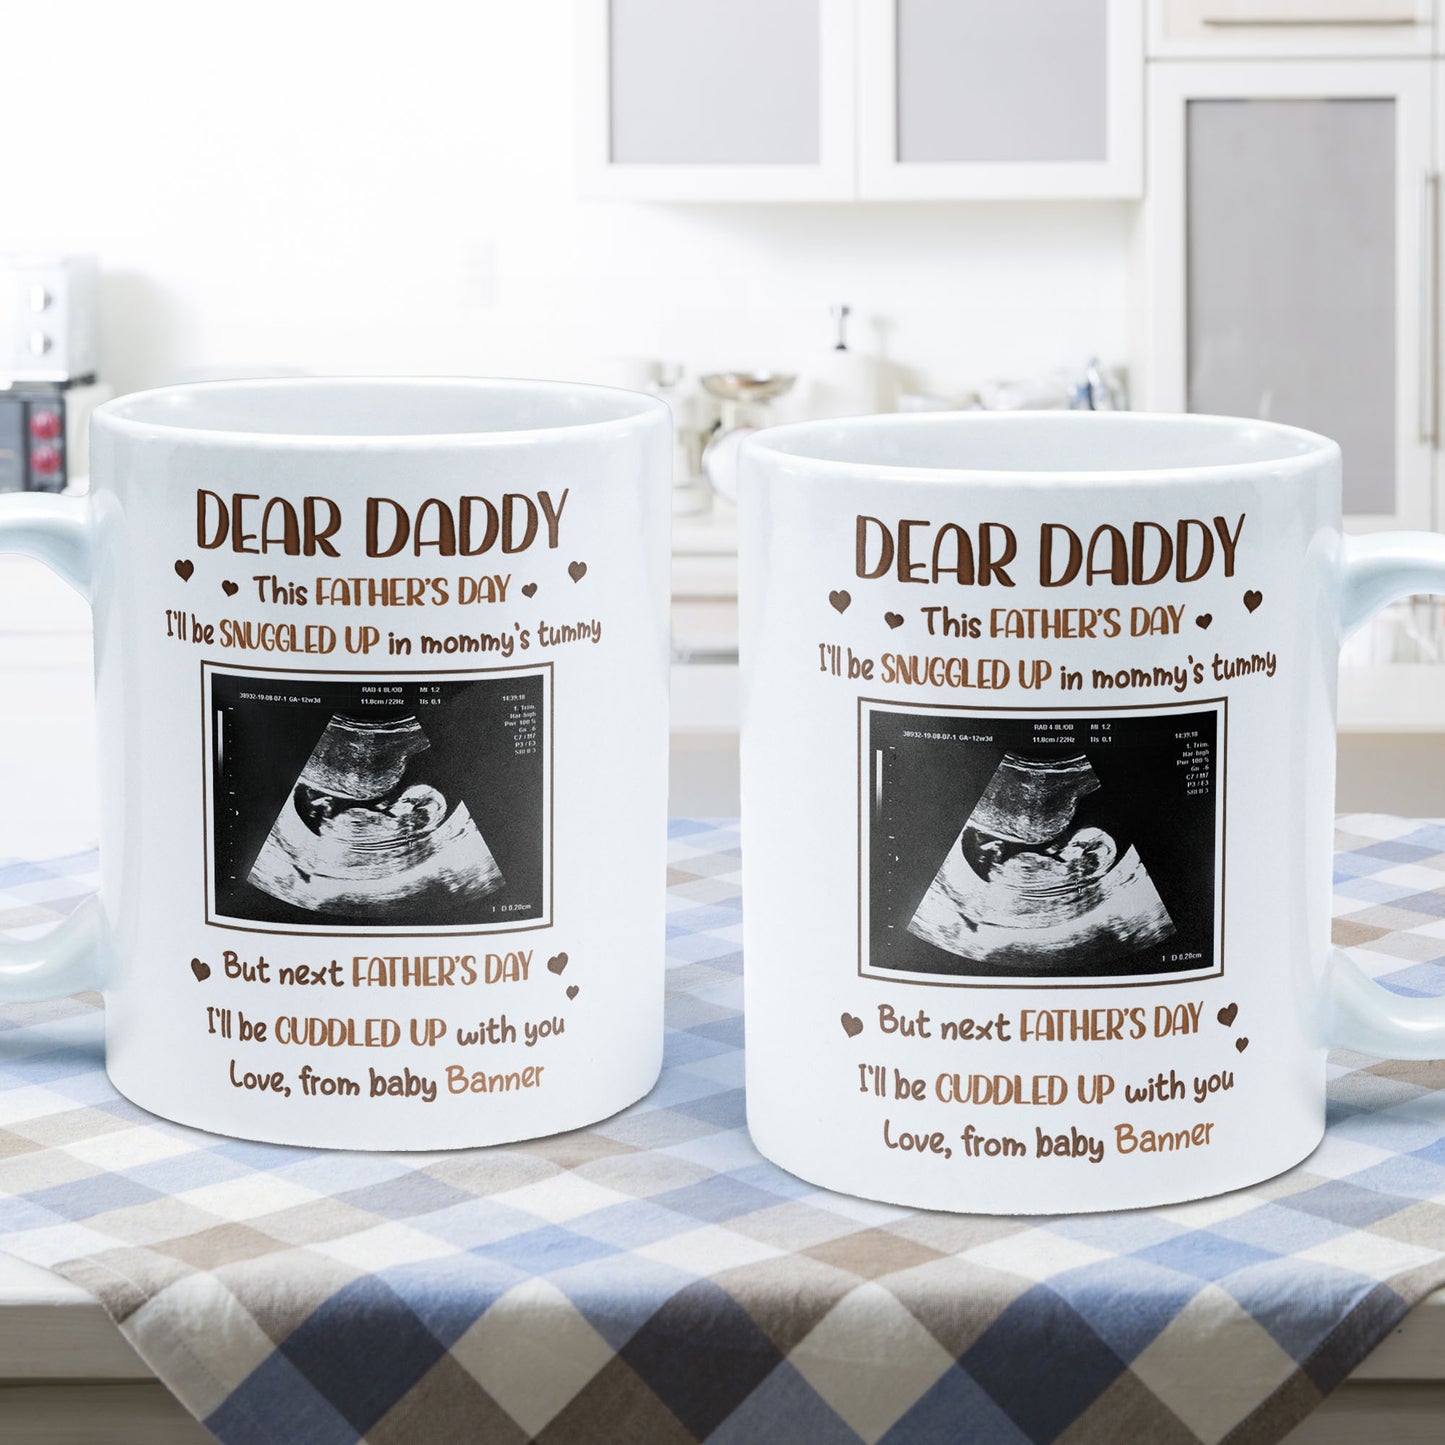 This Father's Day, I'll Be Snuggled Up In Mommy's Tummy - Personalized Mug